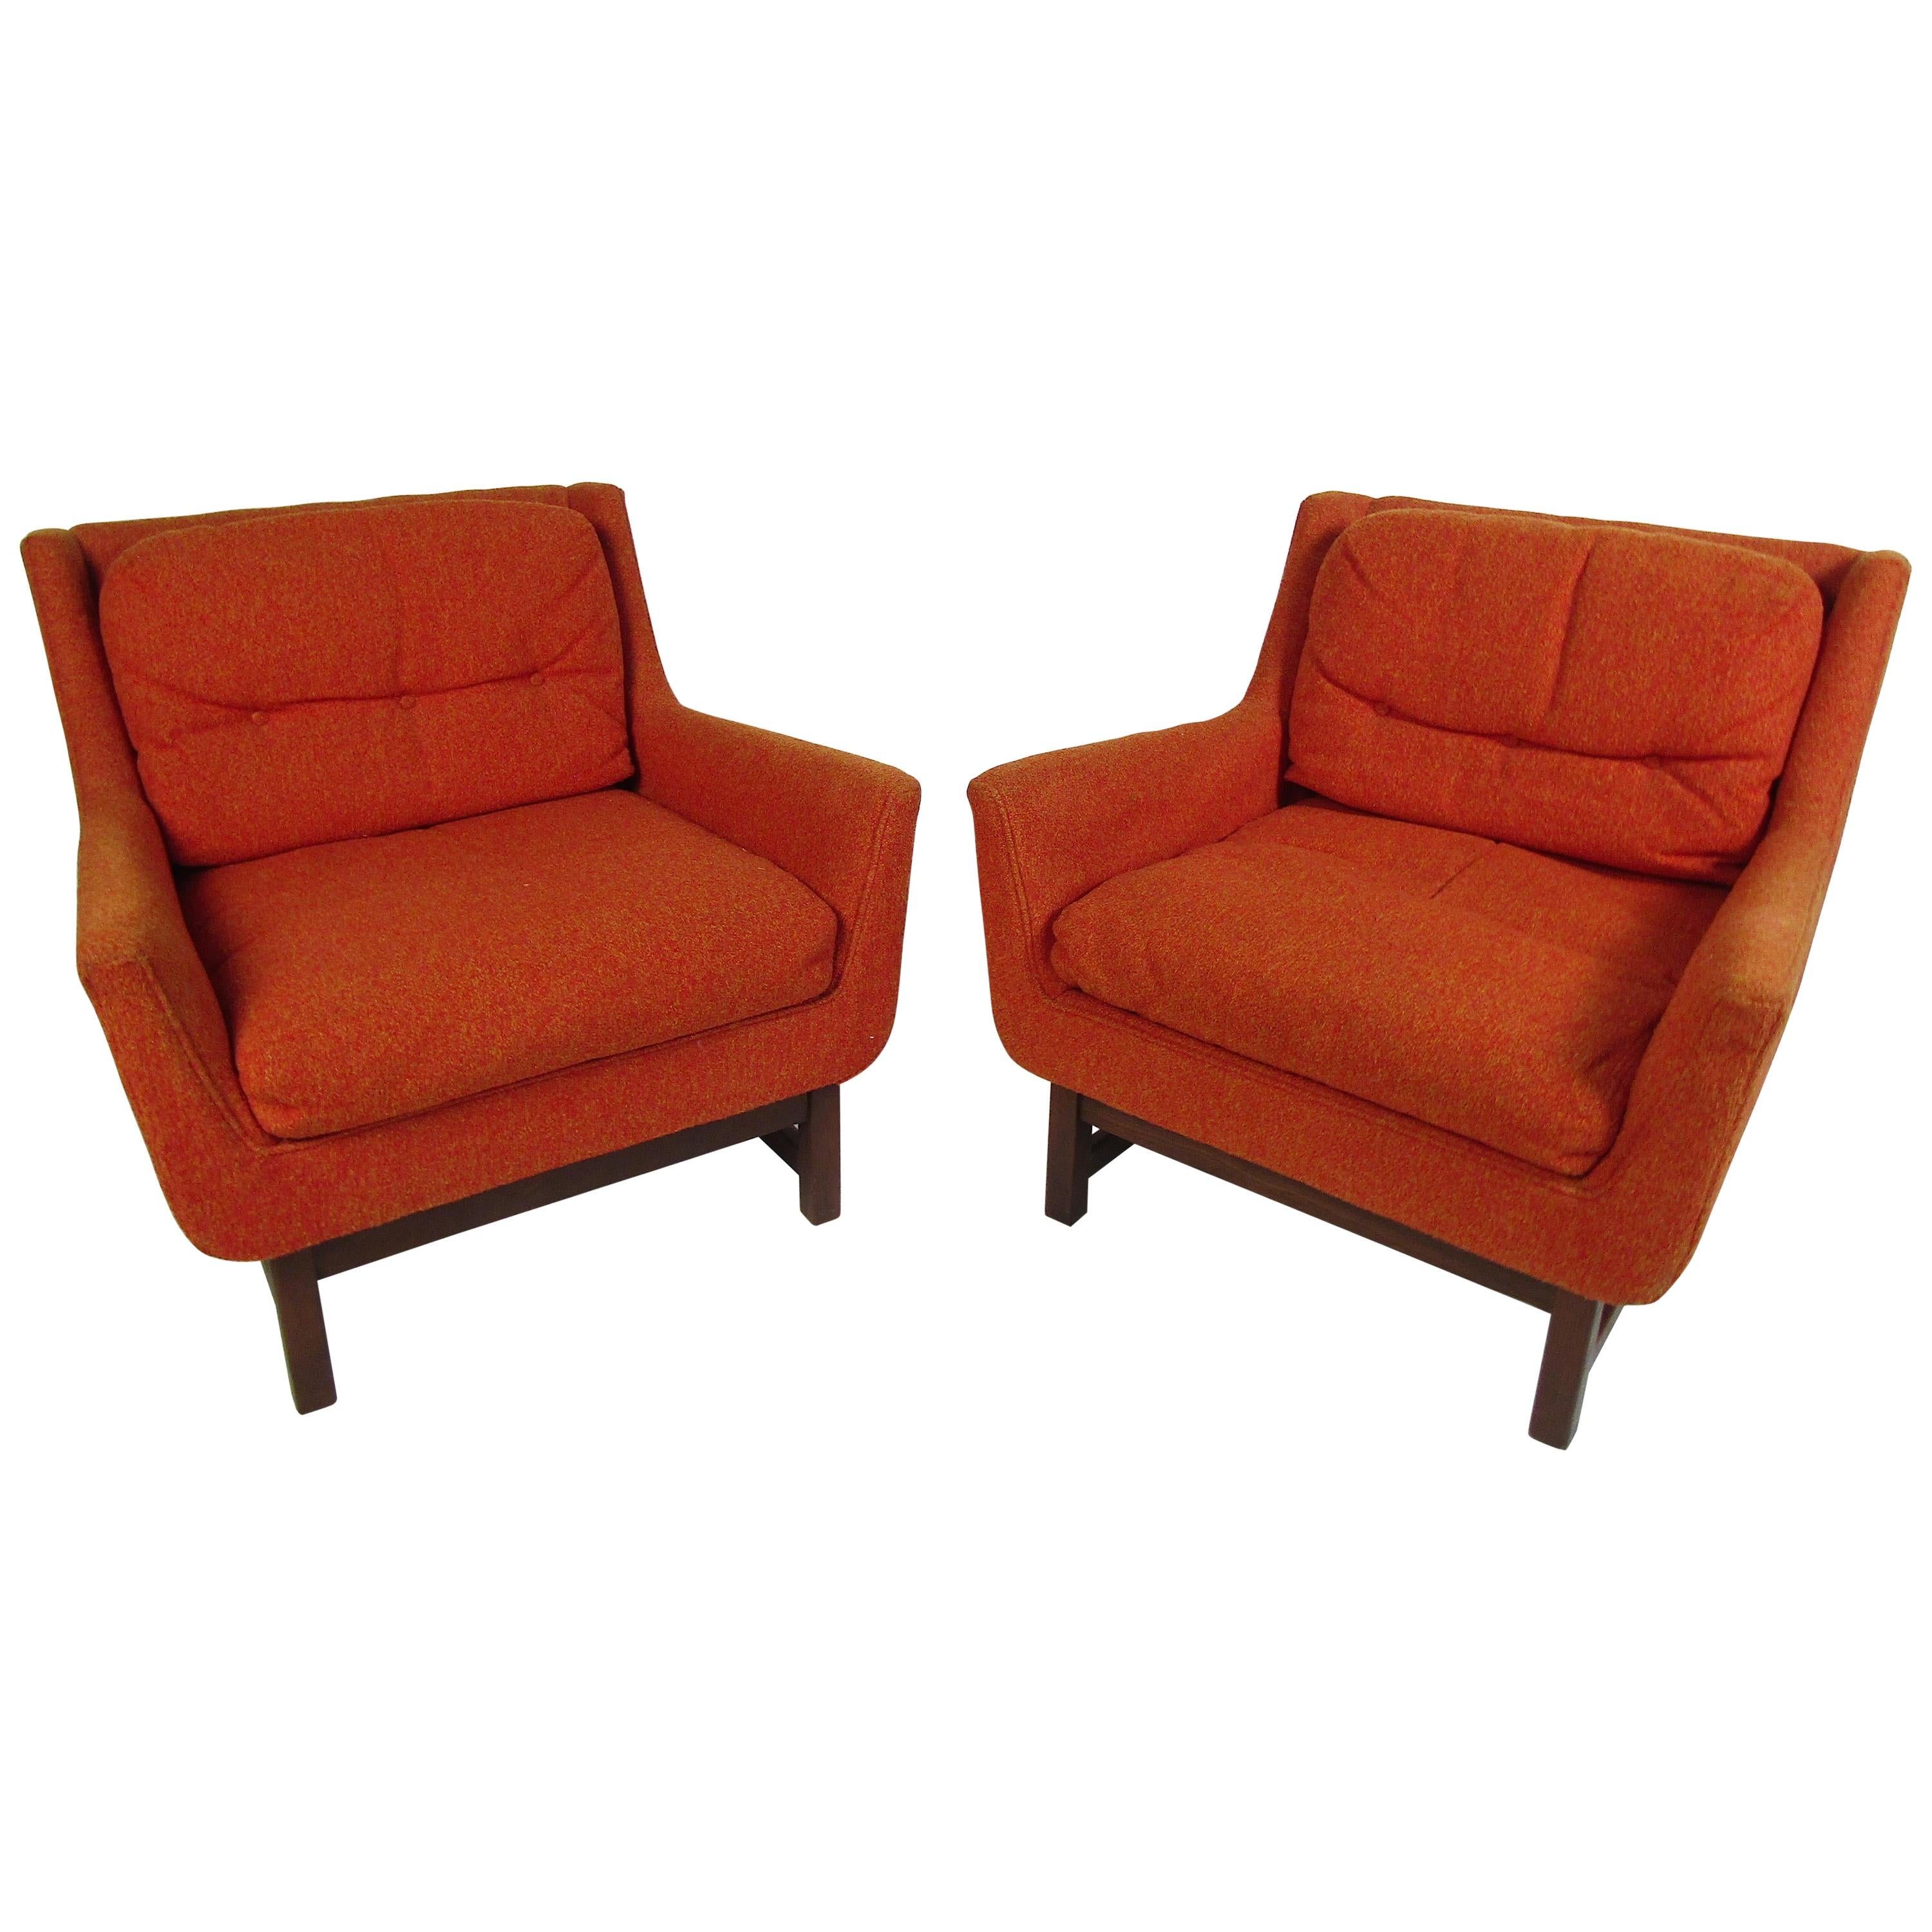 Midcentury Lounge Chairs by Selig, a Pair For Sale